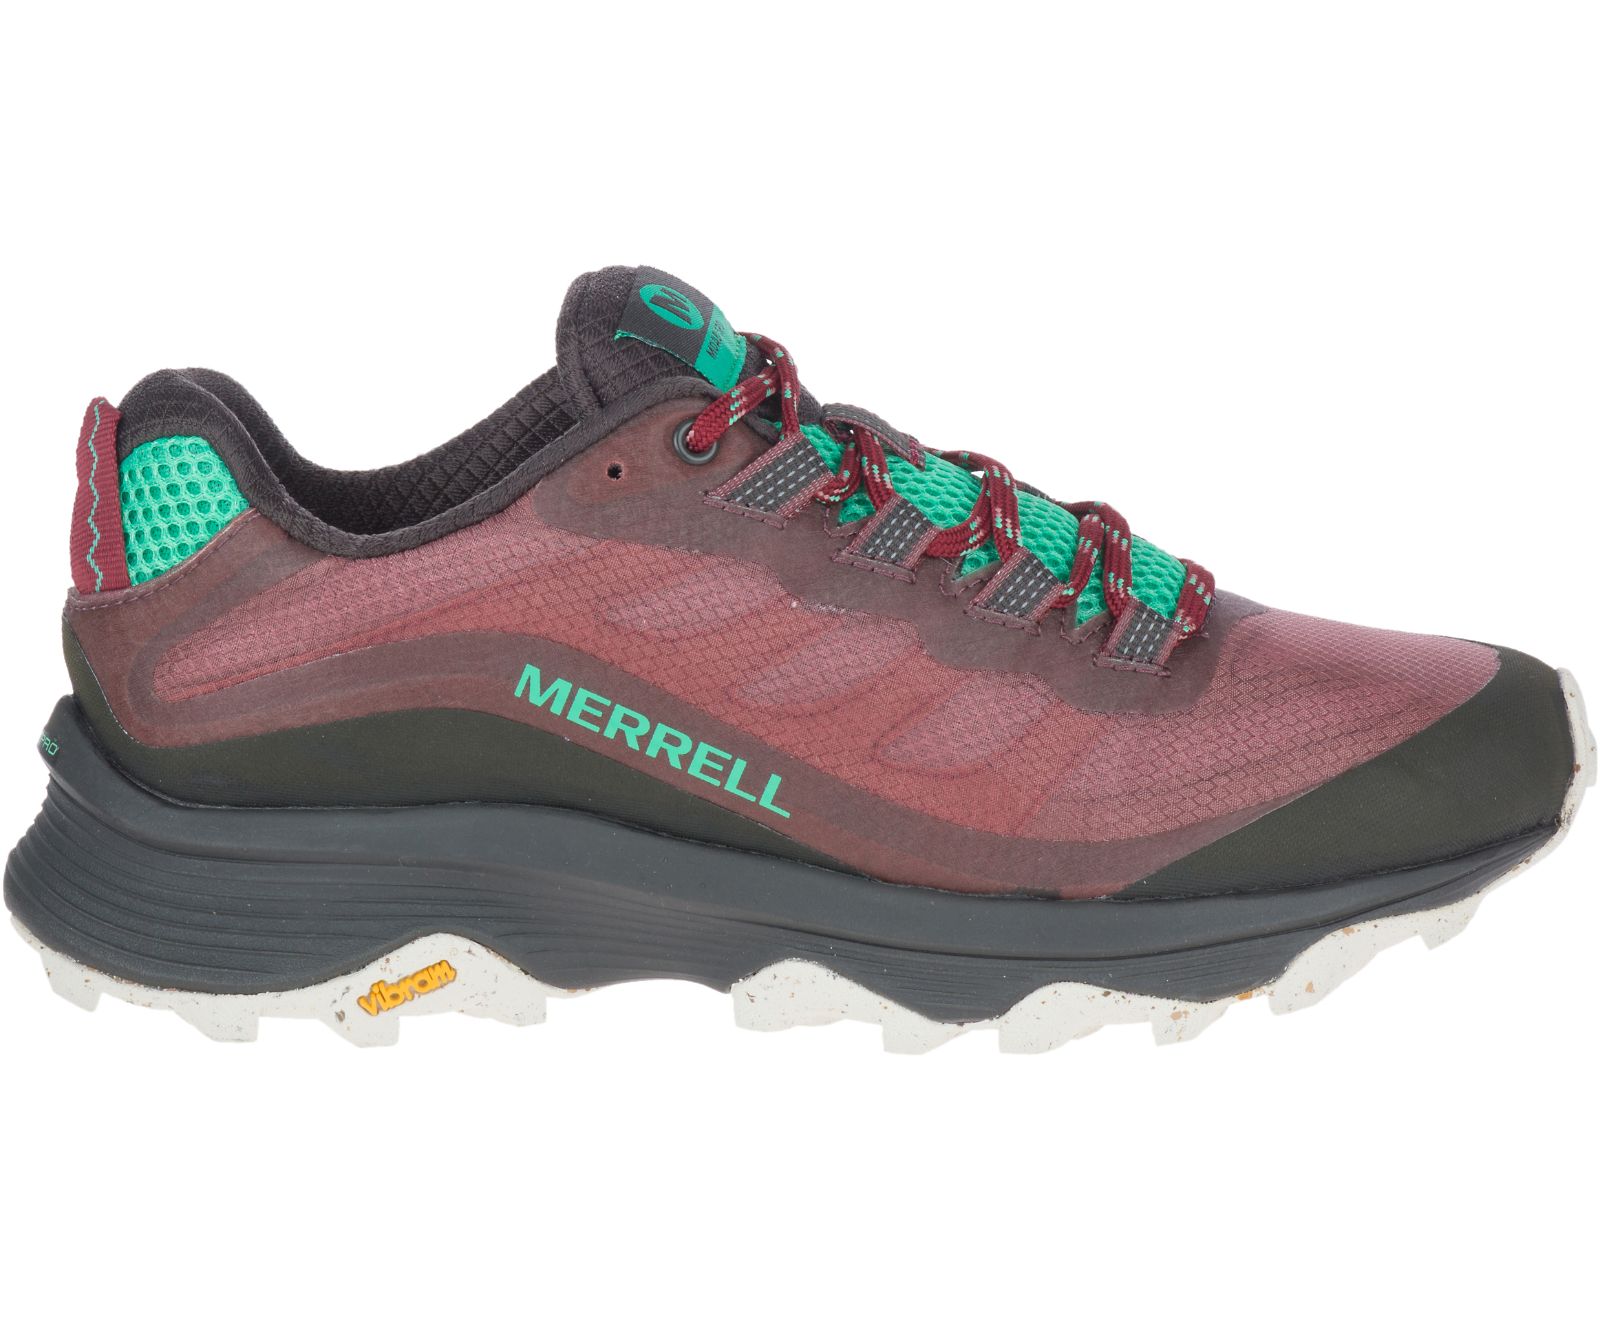 Merrell Moab Speed Hiking Shoes Women's | Women's Hiking Boots & Shoes | CampSaver.com